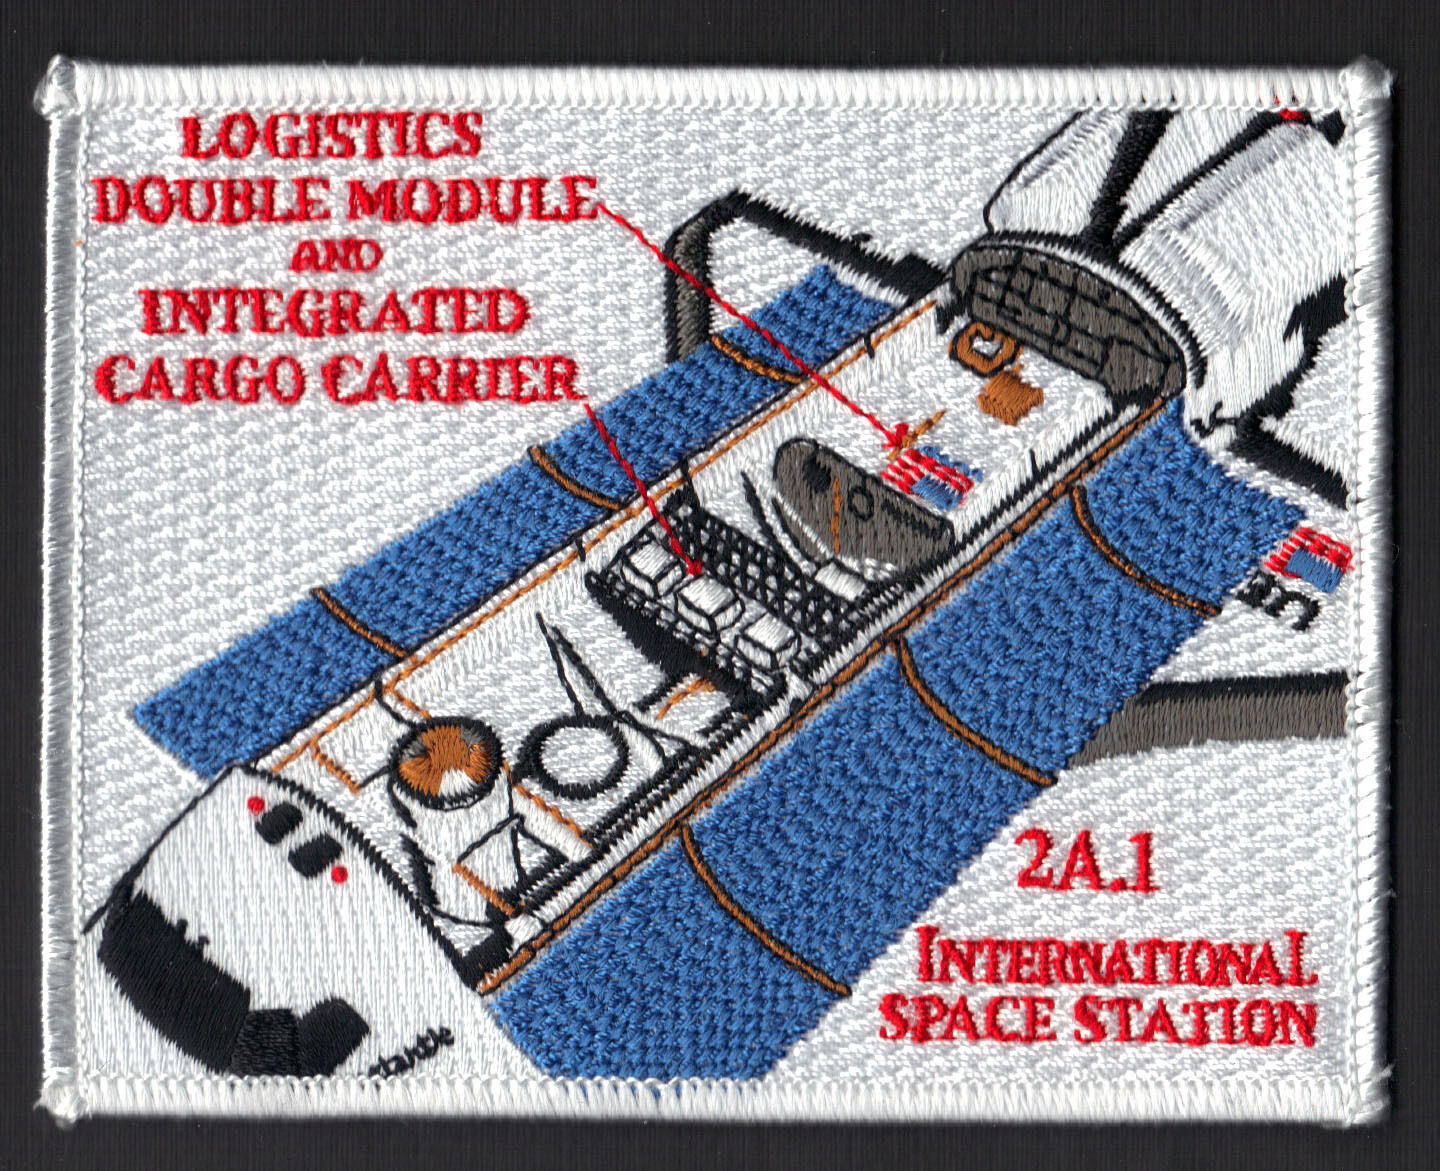 ISS SHUTTLE LOGISTICS DOUBLE MODULE & INTEGRATED CARGO CARRIER 2A.1 NASA PATCH 